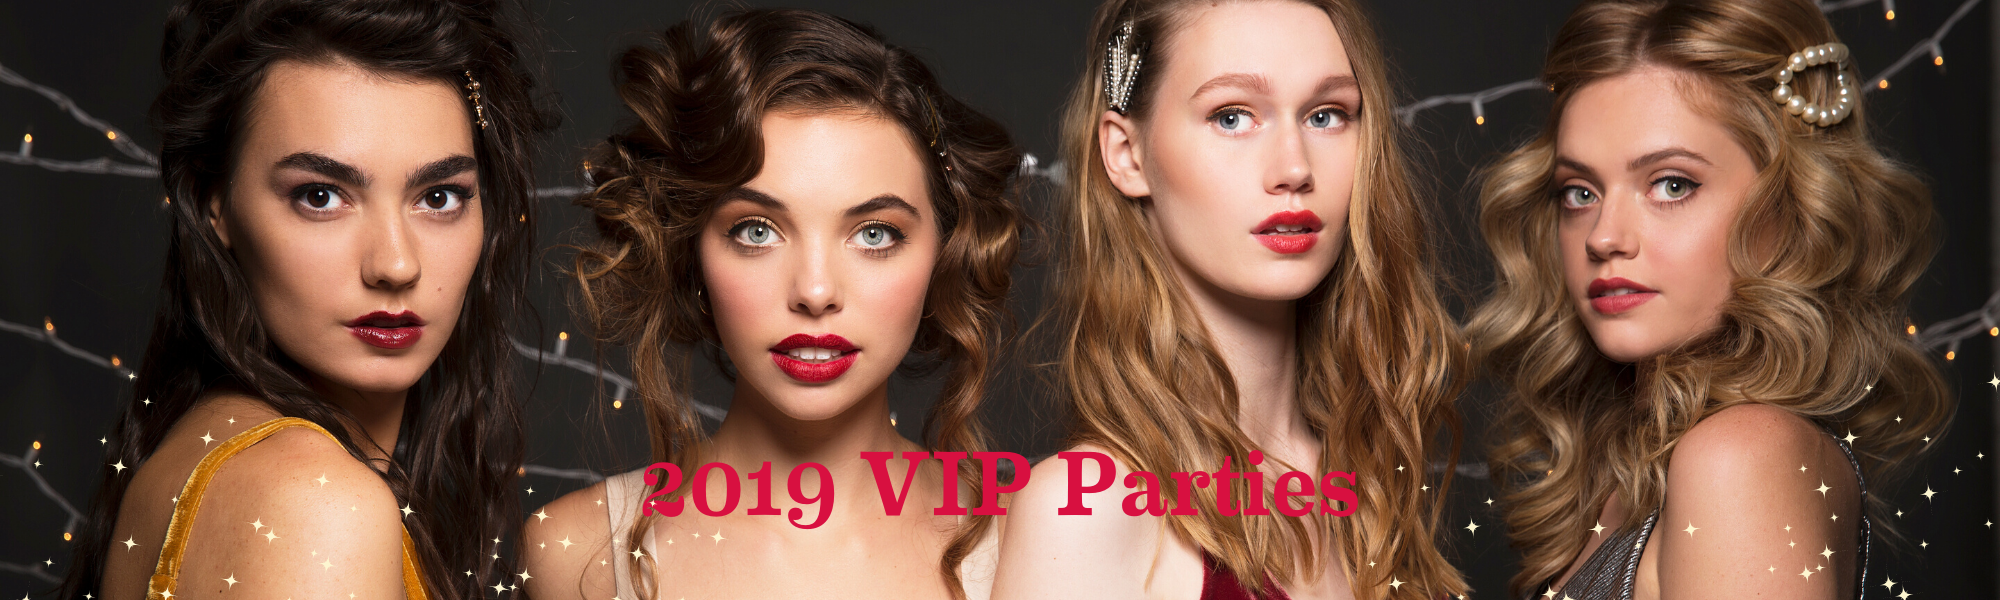 Please join us for our 2019 VIP Parties to get your 2020 VIP card plus exclusive deals and refreshments.